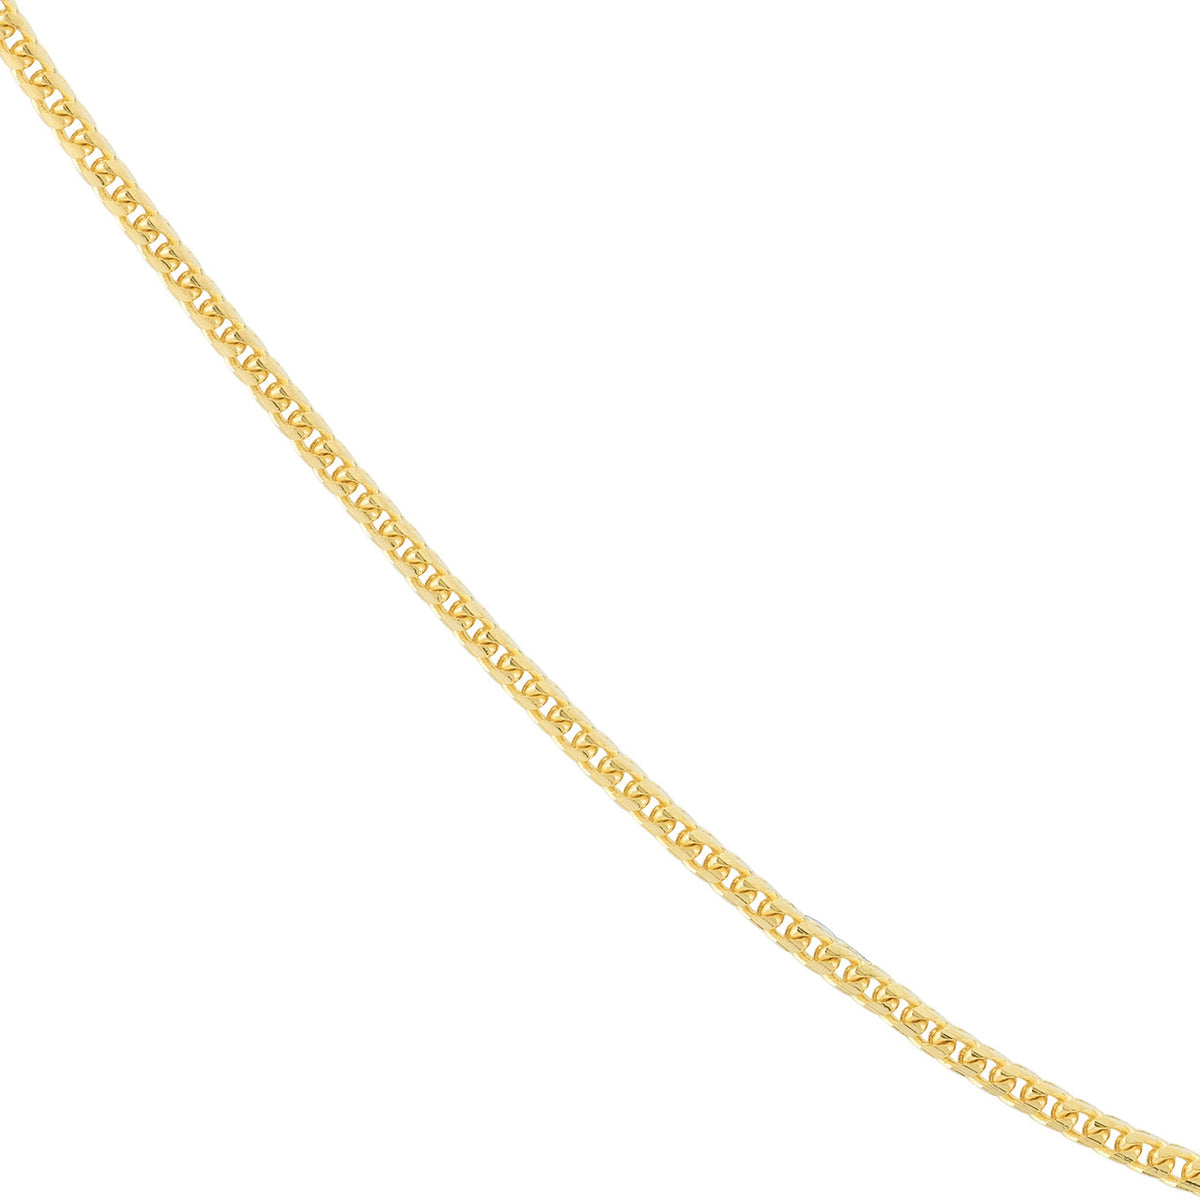 14K Yellow Gold or White Gold 1.2mm Franco Chain Necklace with Lobster Lock